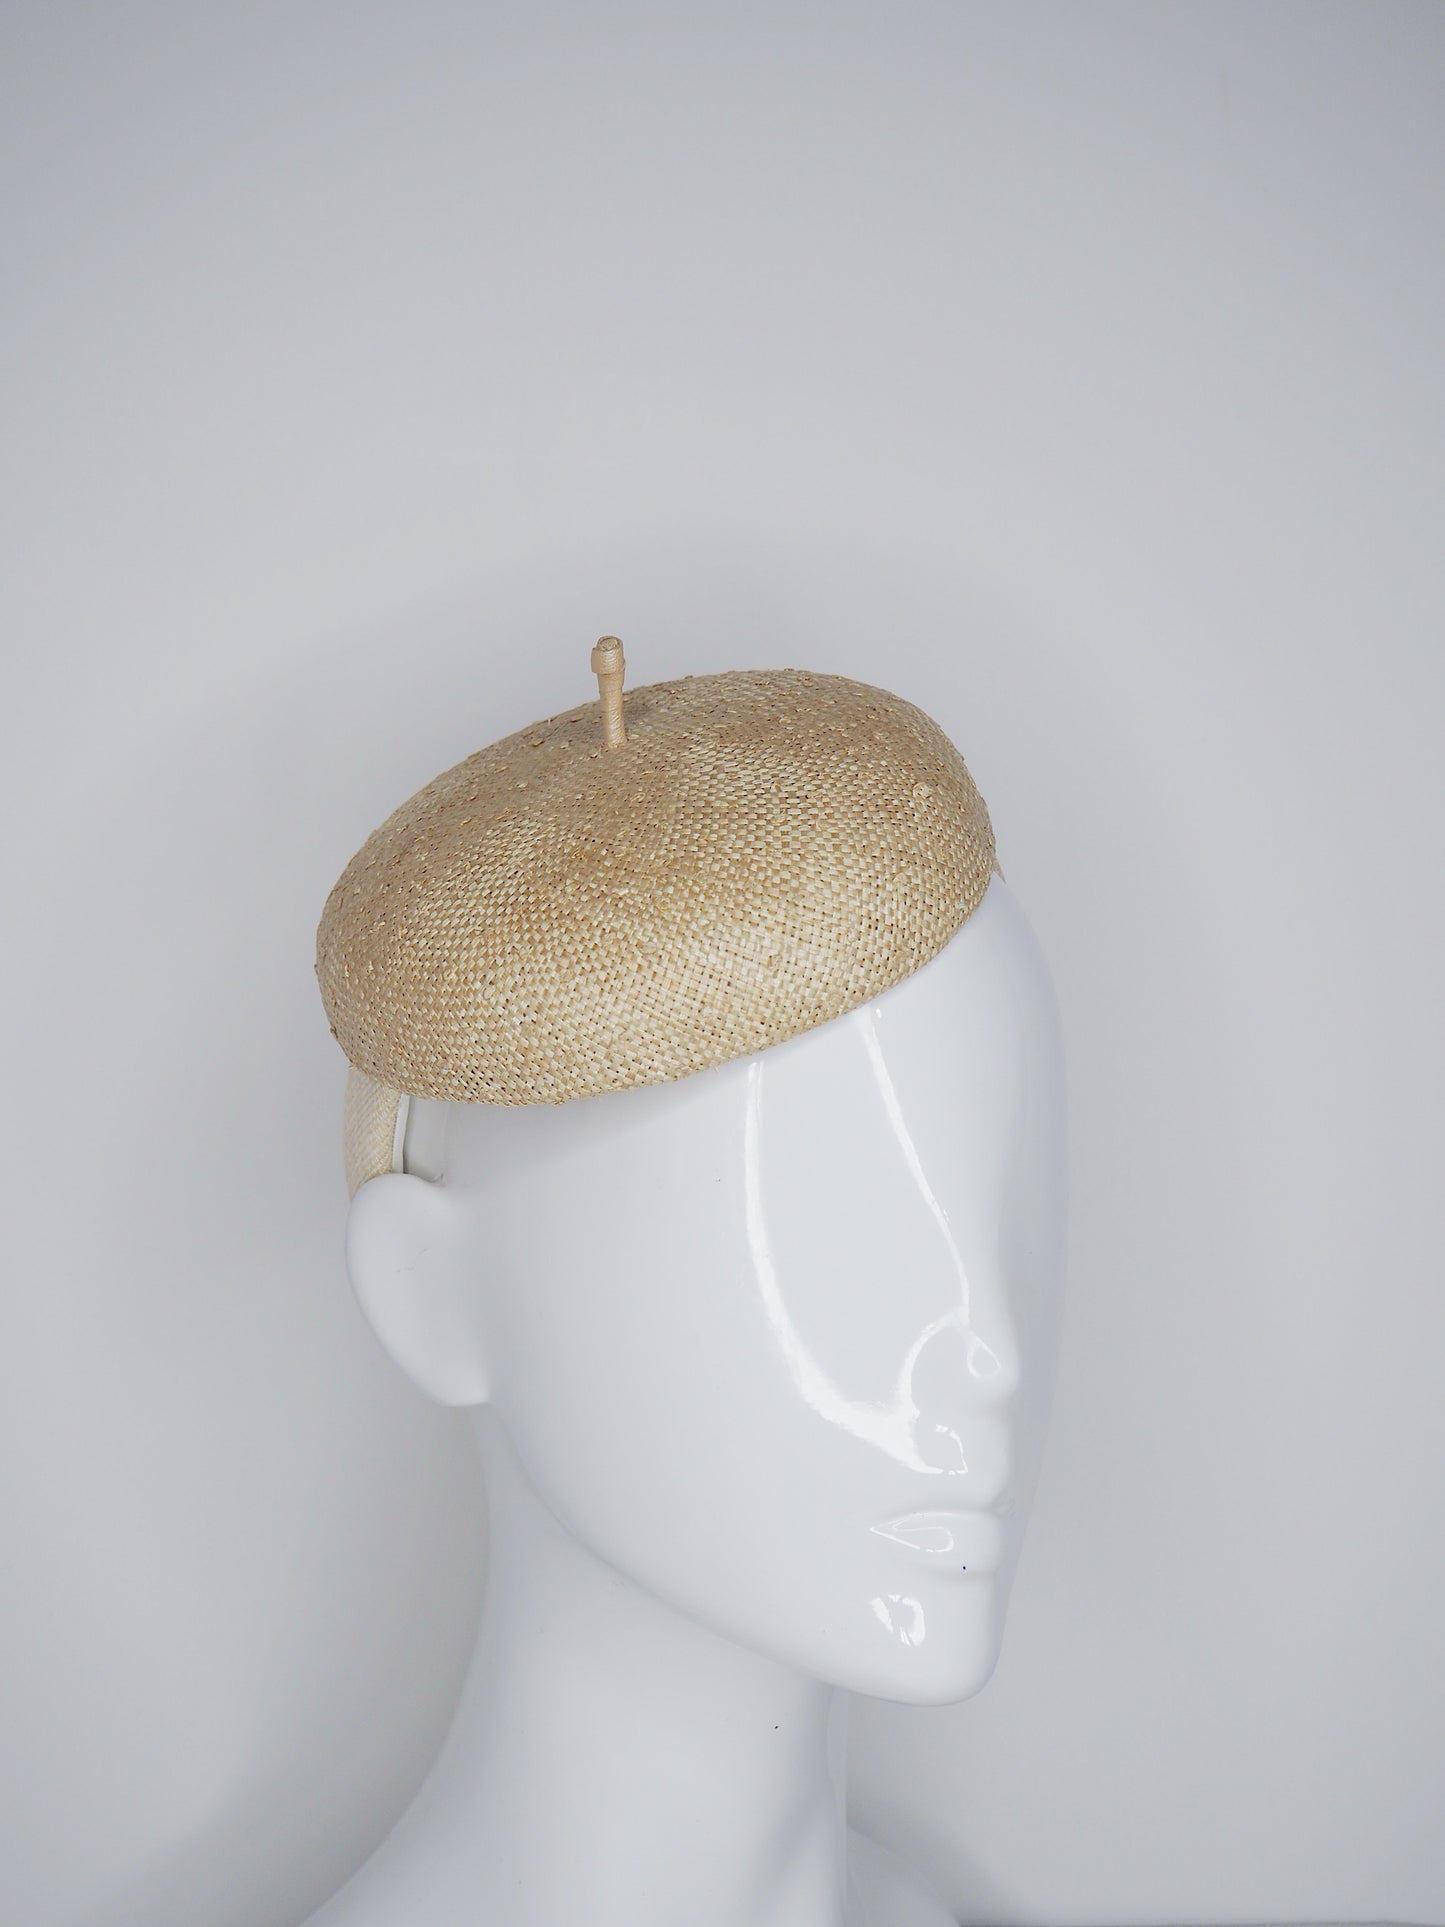 Knotty But Nice -  button beret on a Natural Straw headband.